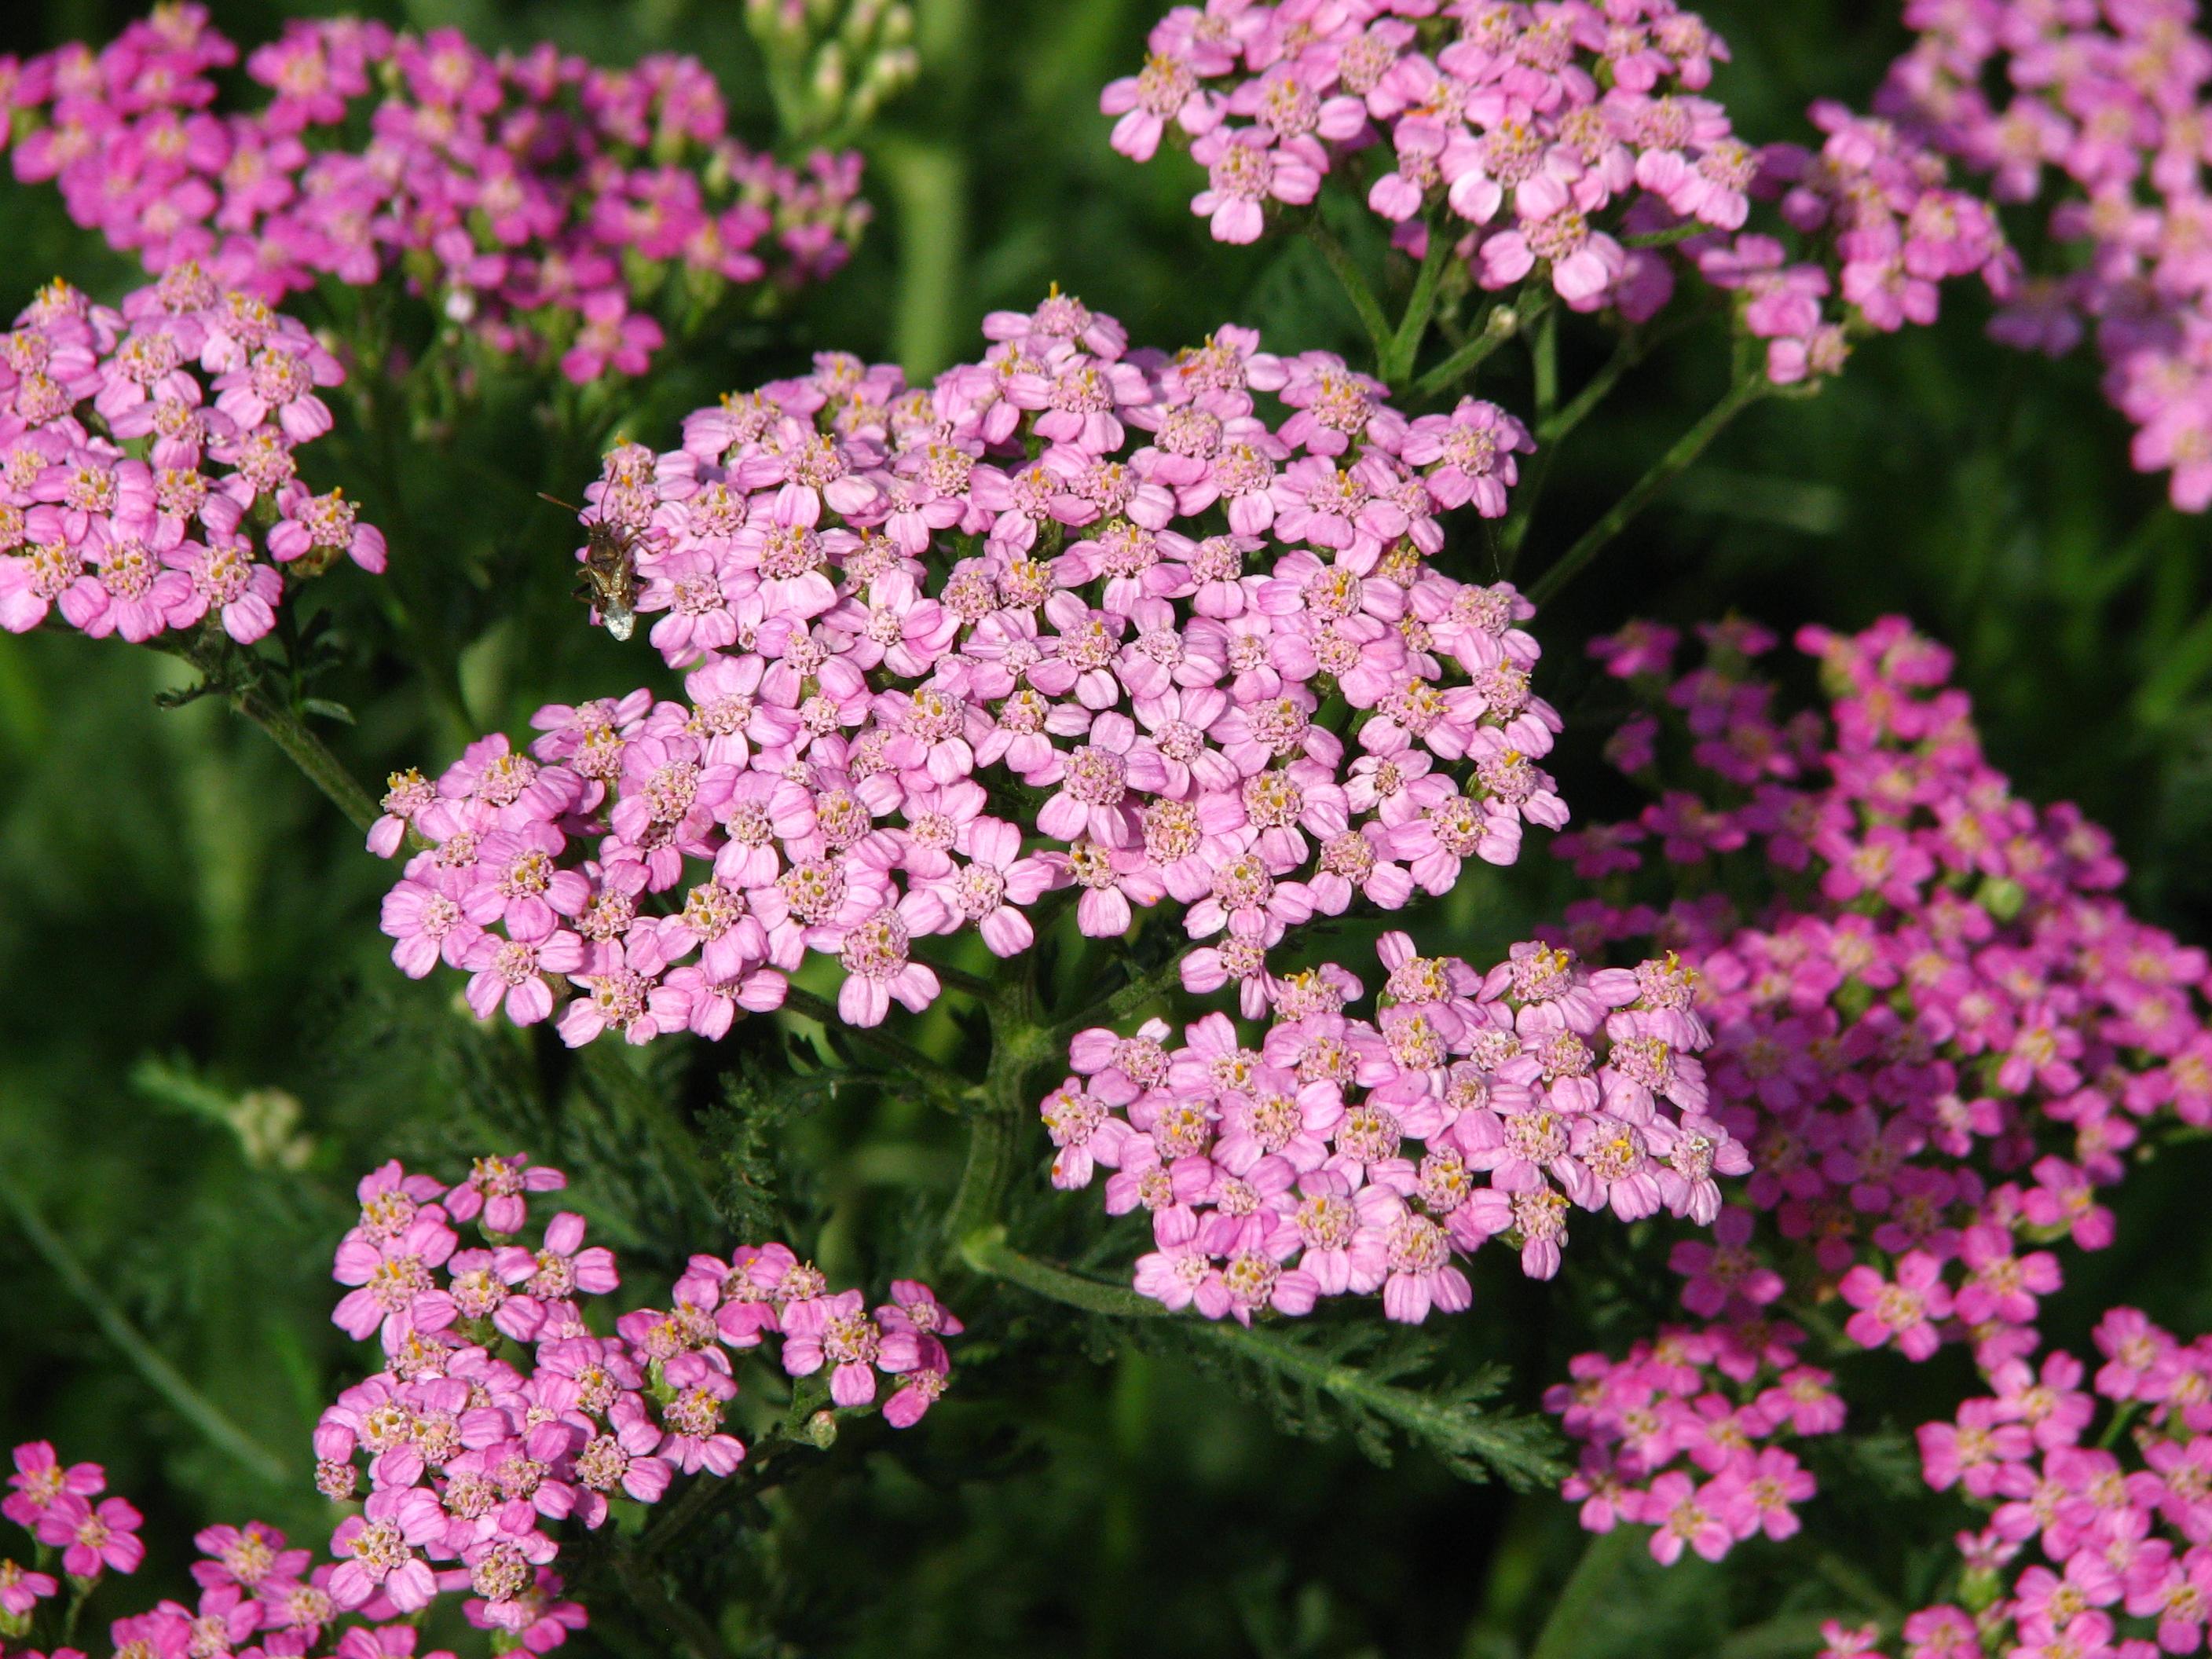 pink flowers with pink-yellow center, green leaves and stems